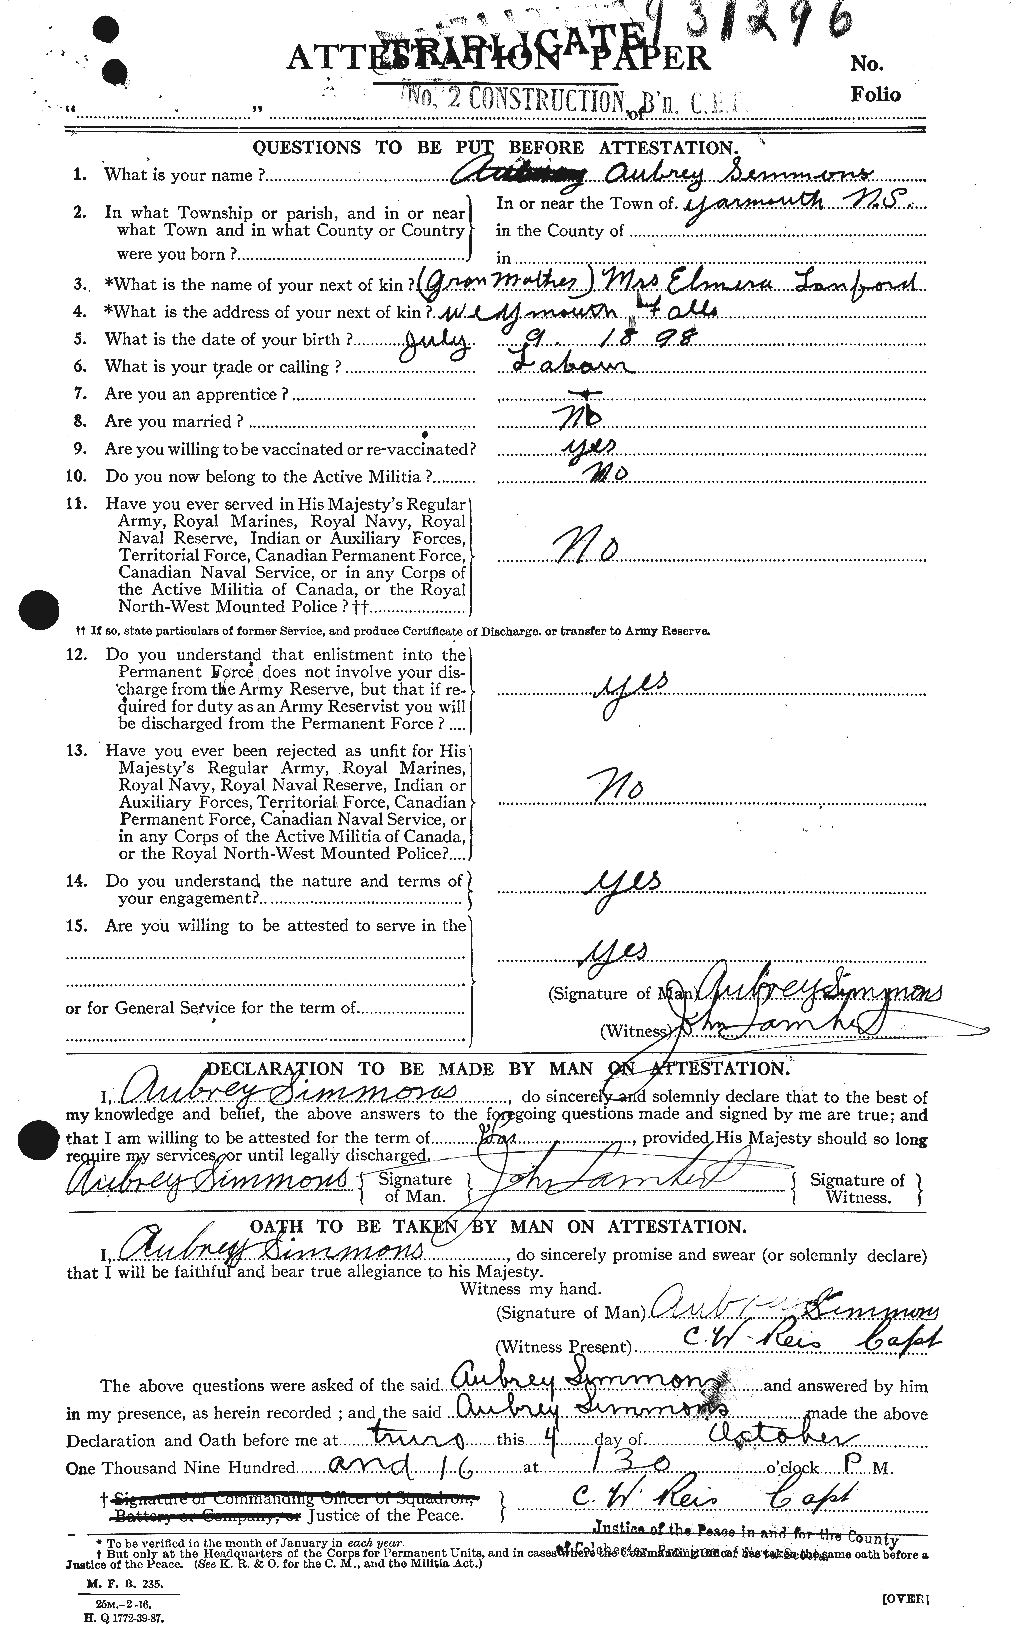 Personnel Records of the First World War - CEF 099150a